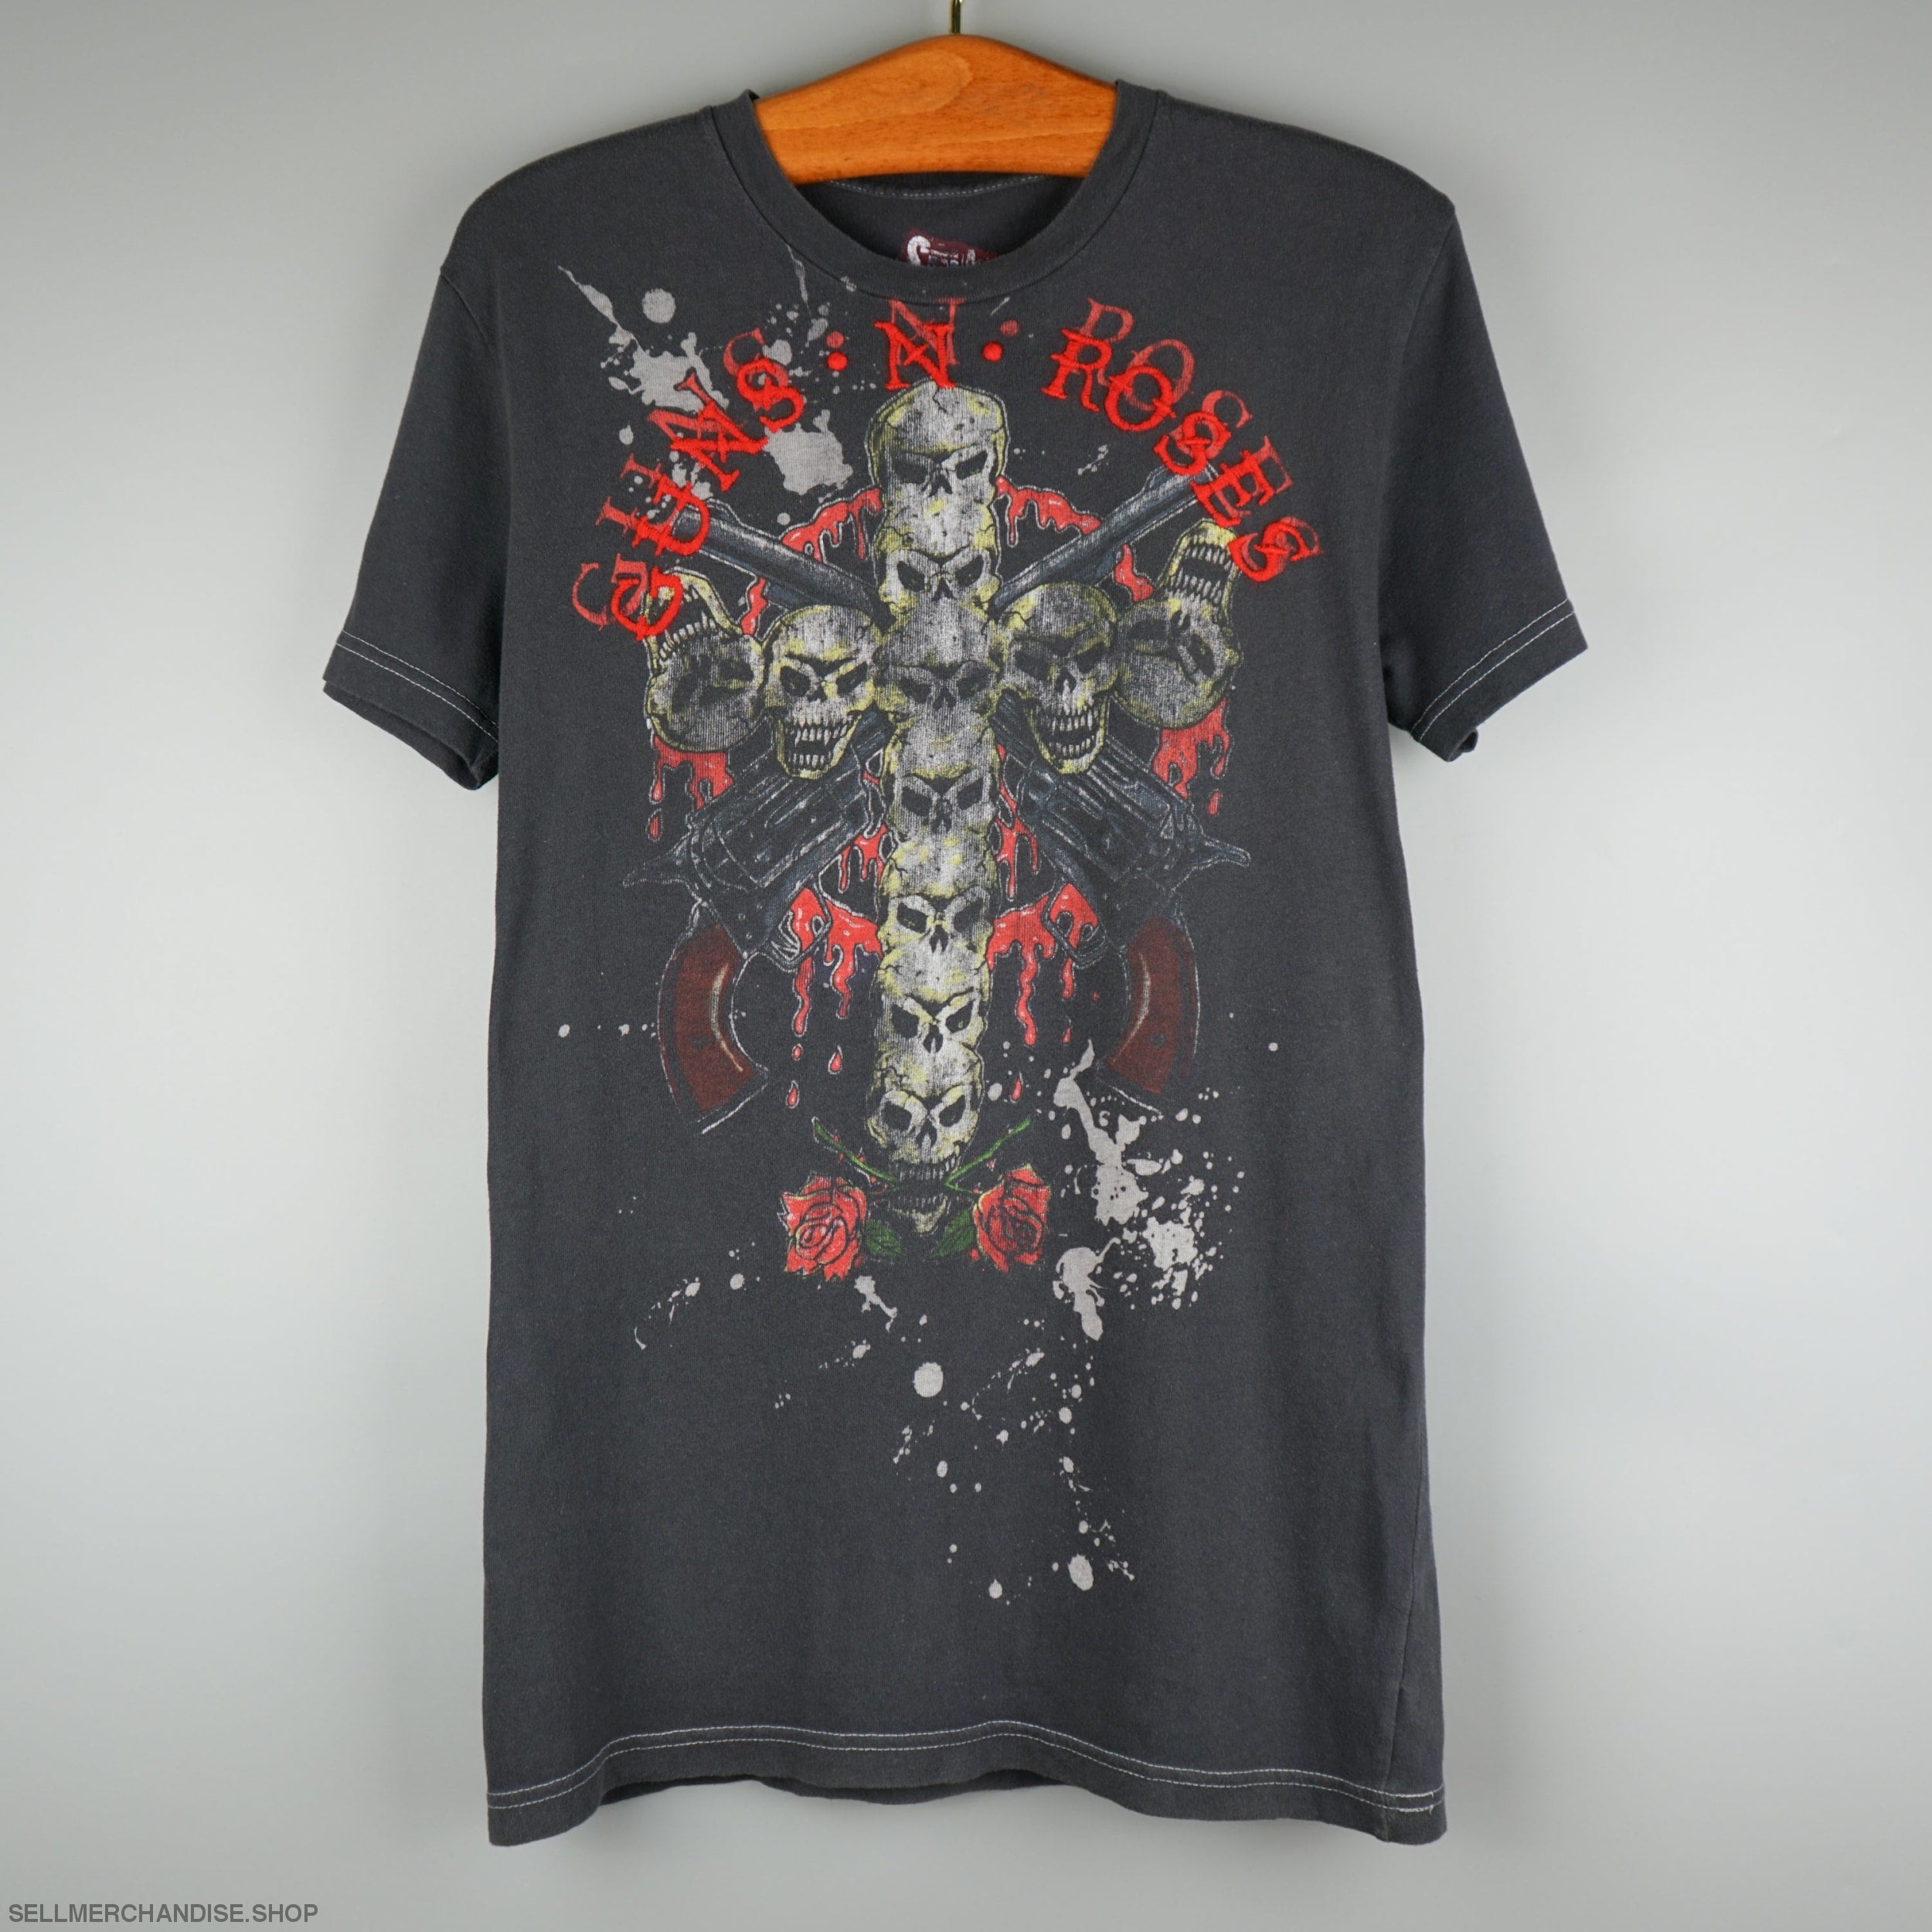 Vintage Guns N Roses T-Shirts Collection